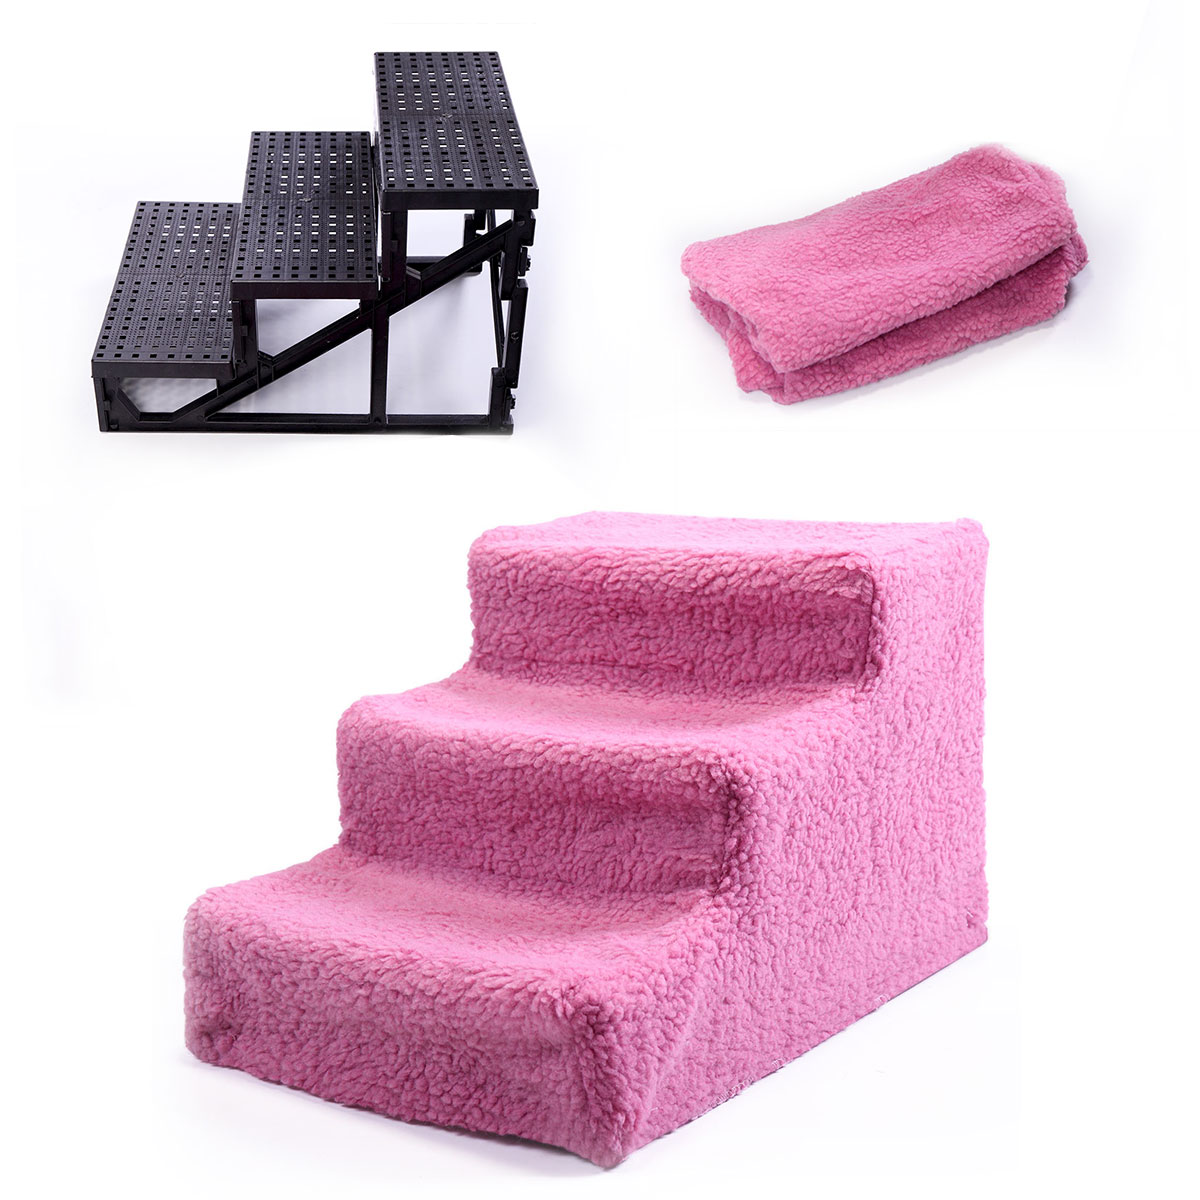 Coziwow Pet Stairs 3 Steps Indoor Dog Cat Steps Removable Washable Pets Ramp Ladder Pink - image 4 of 10